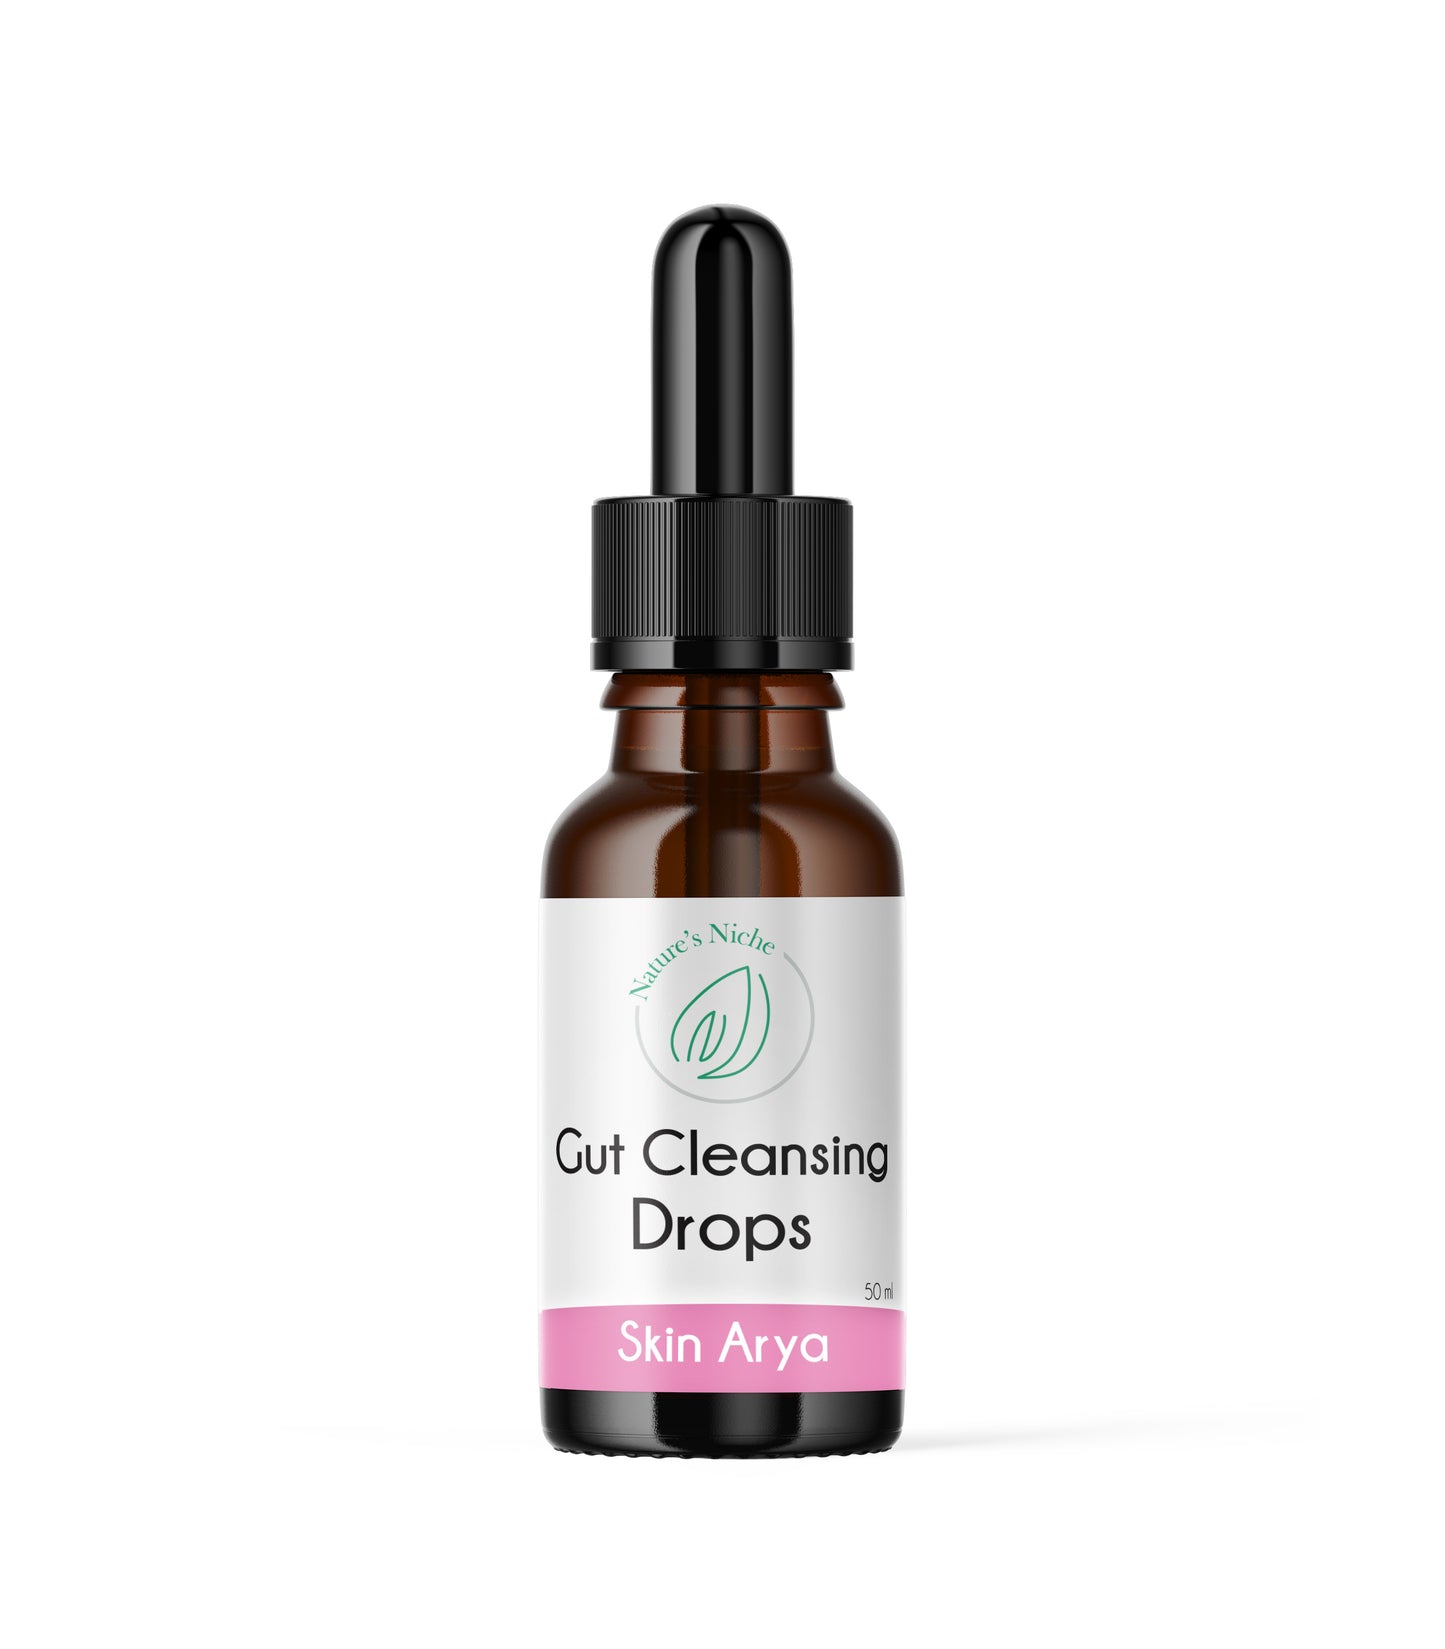 Gut Cleansing Drops